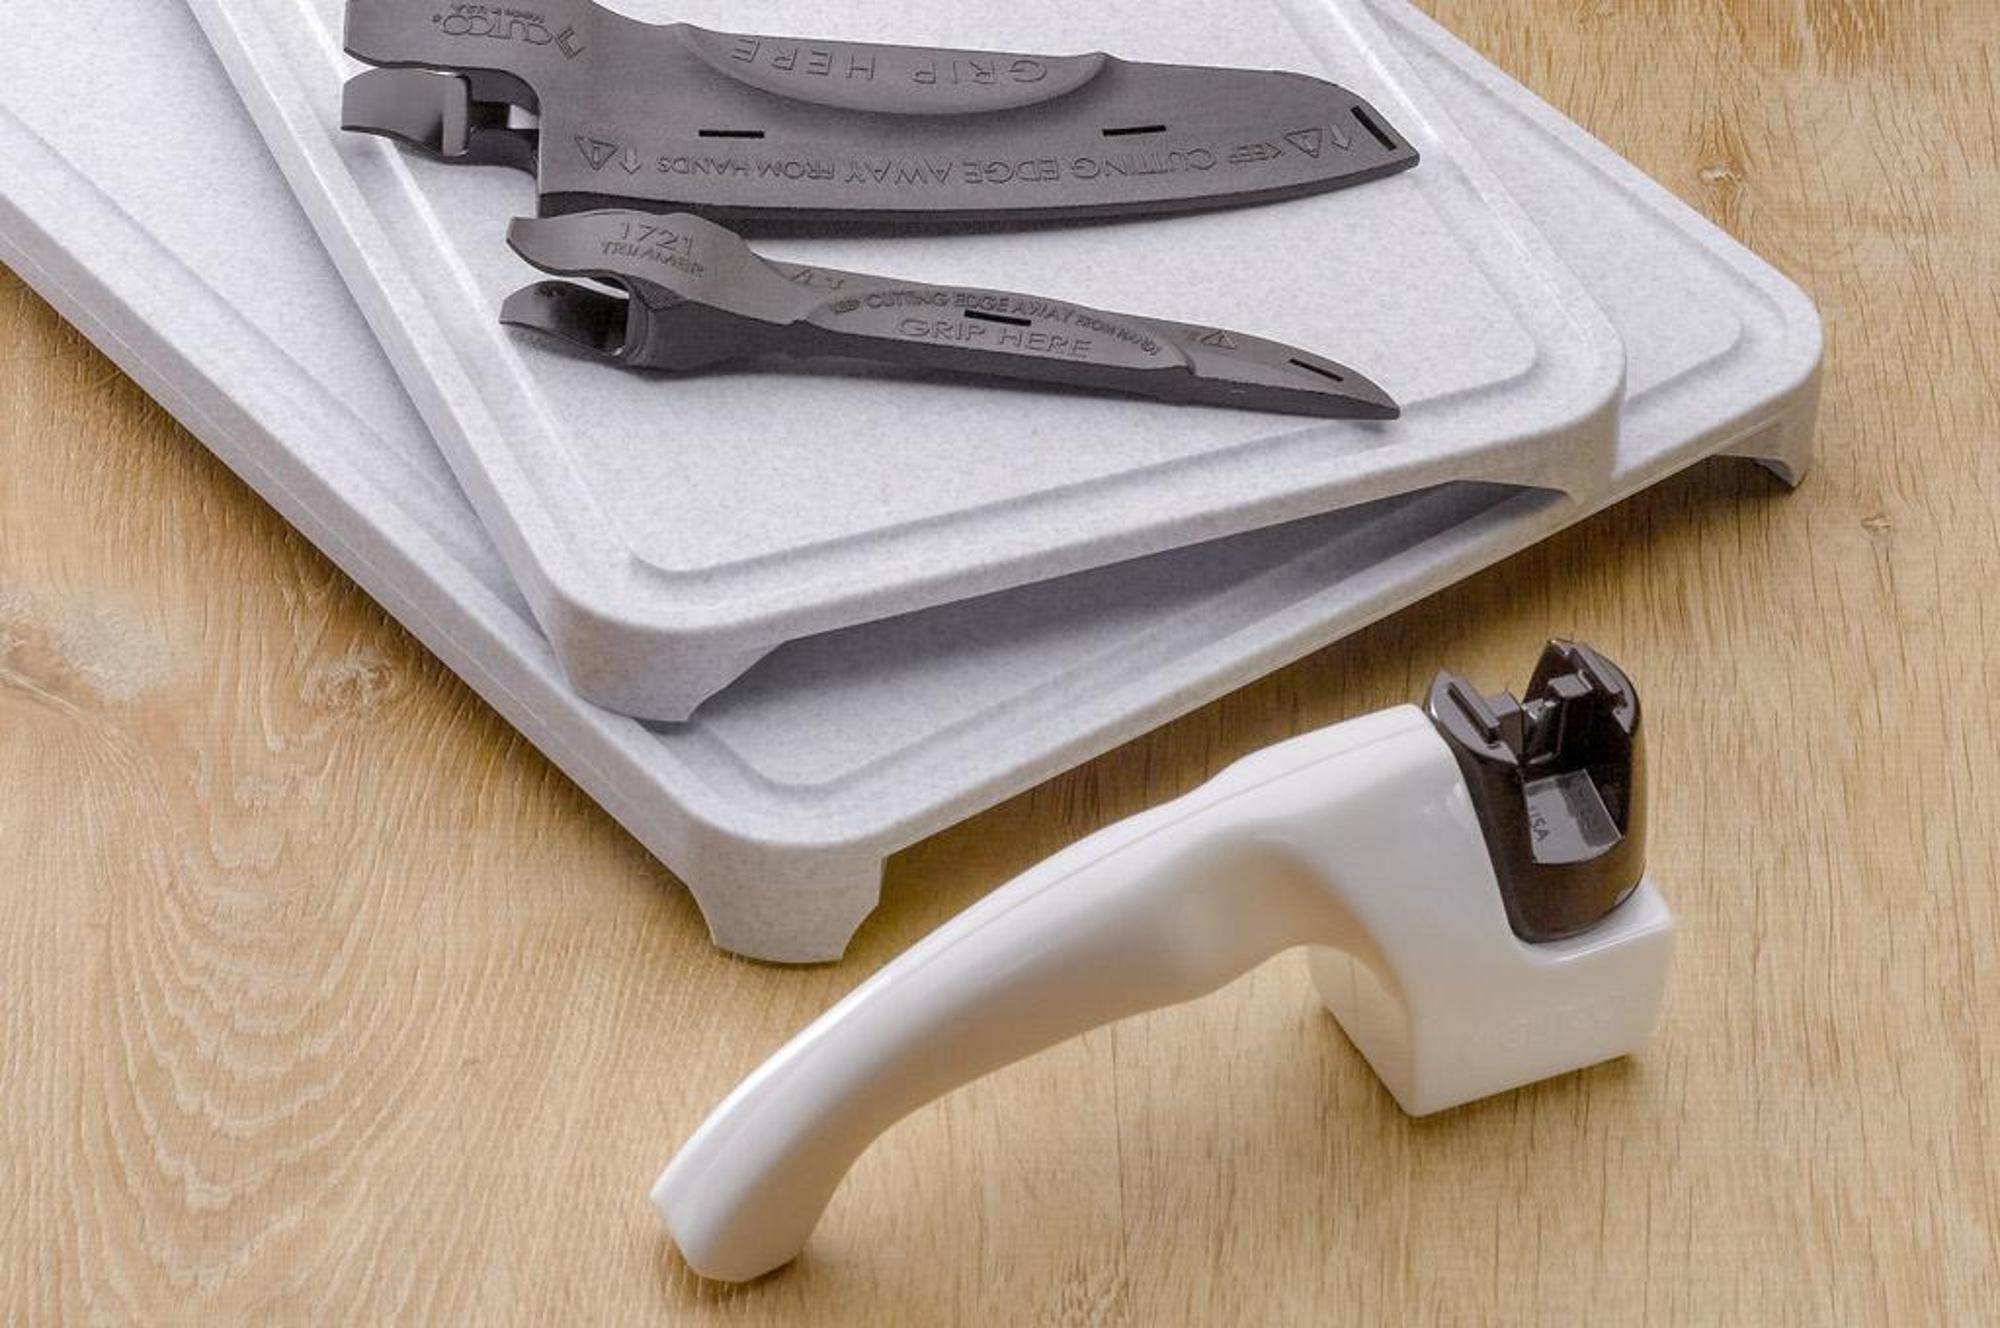 https://images.cutco.com/learn/2020/3-s-knife-care-cover-l.jpg